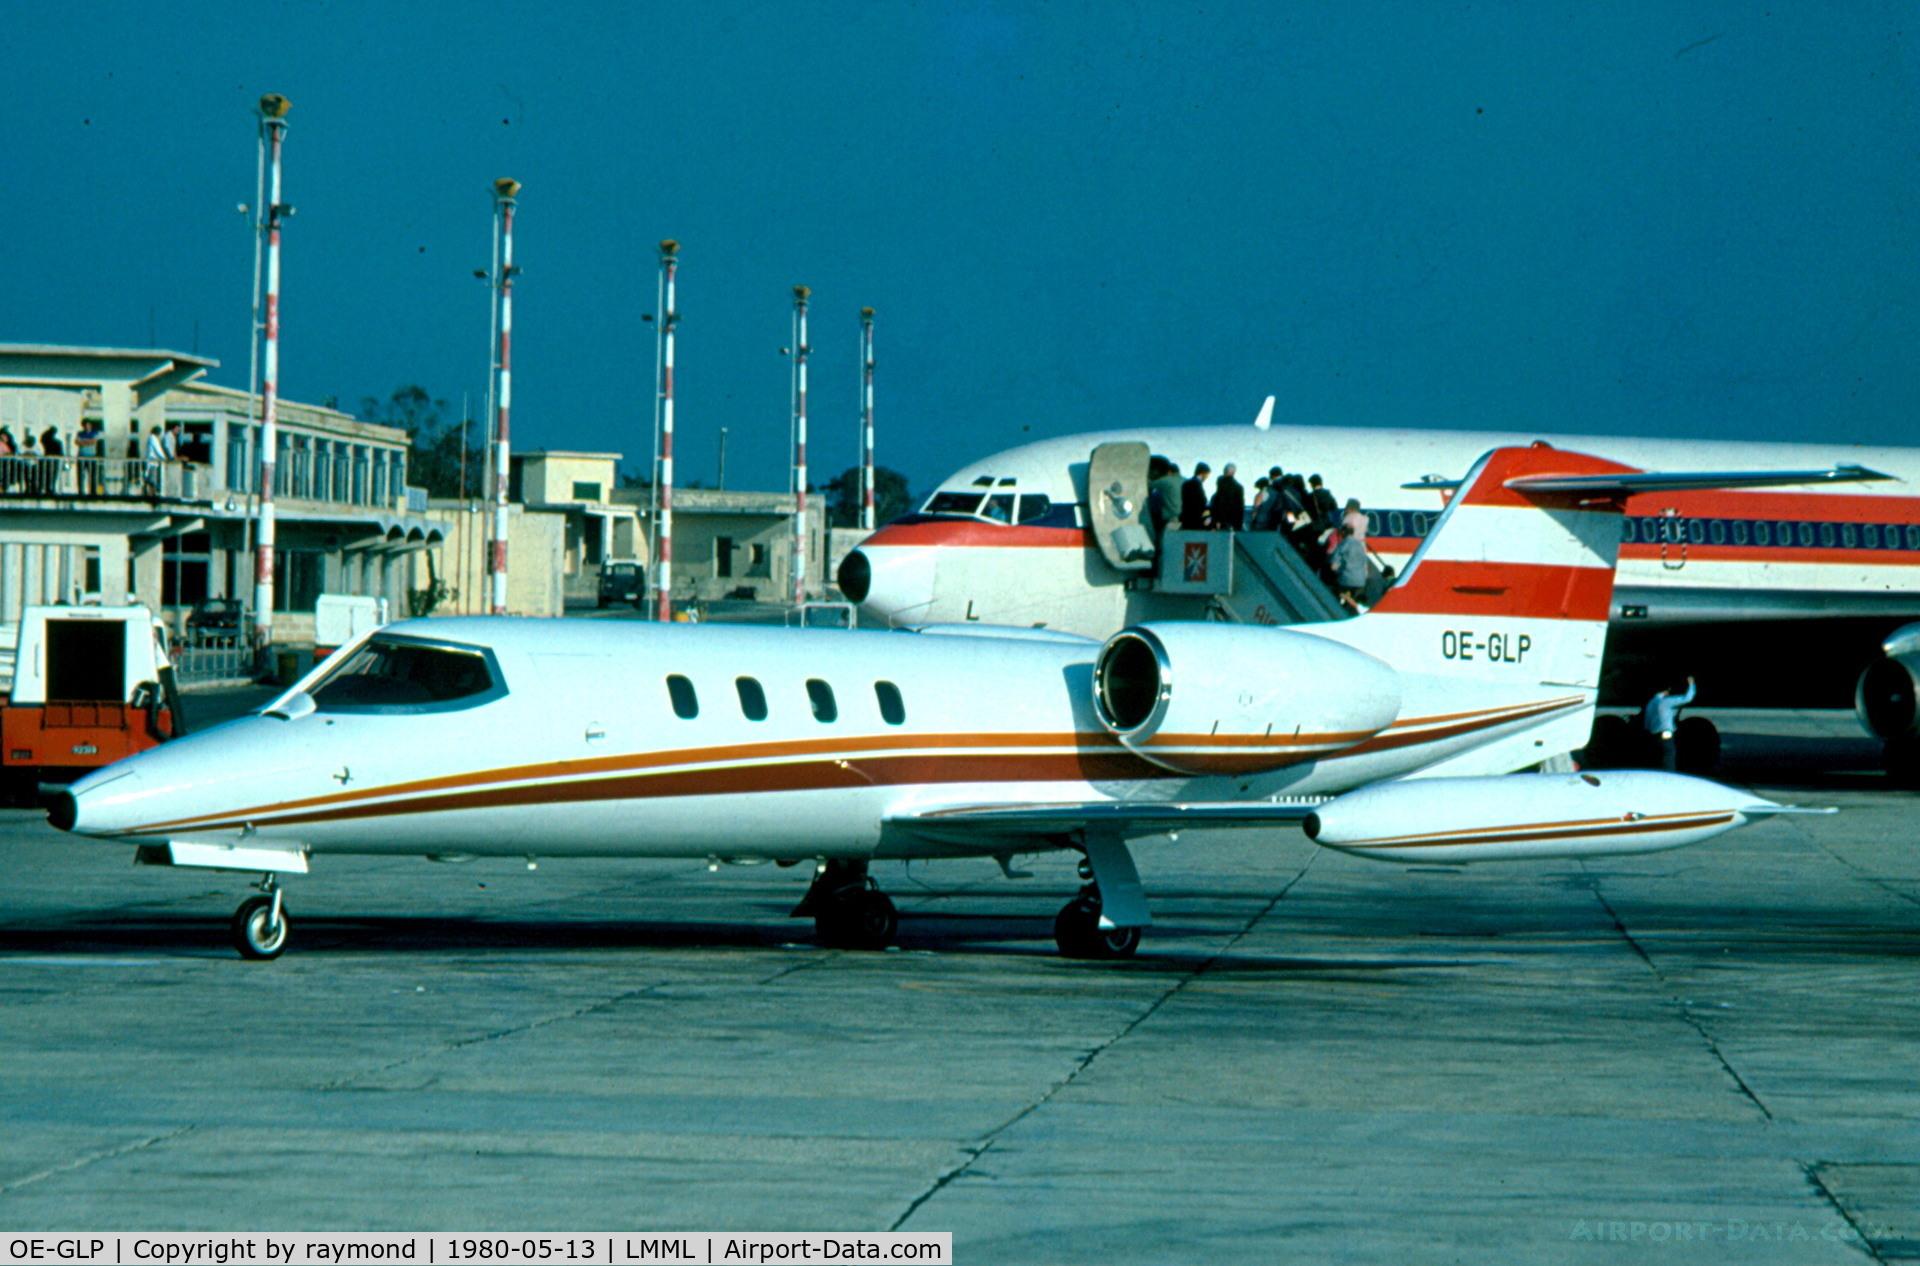 OE-GLP, 1976 Gates Learjet 36A C/N 025, Learjet OE-GLP on apron 8 of the old airport